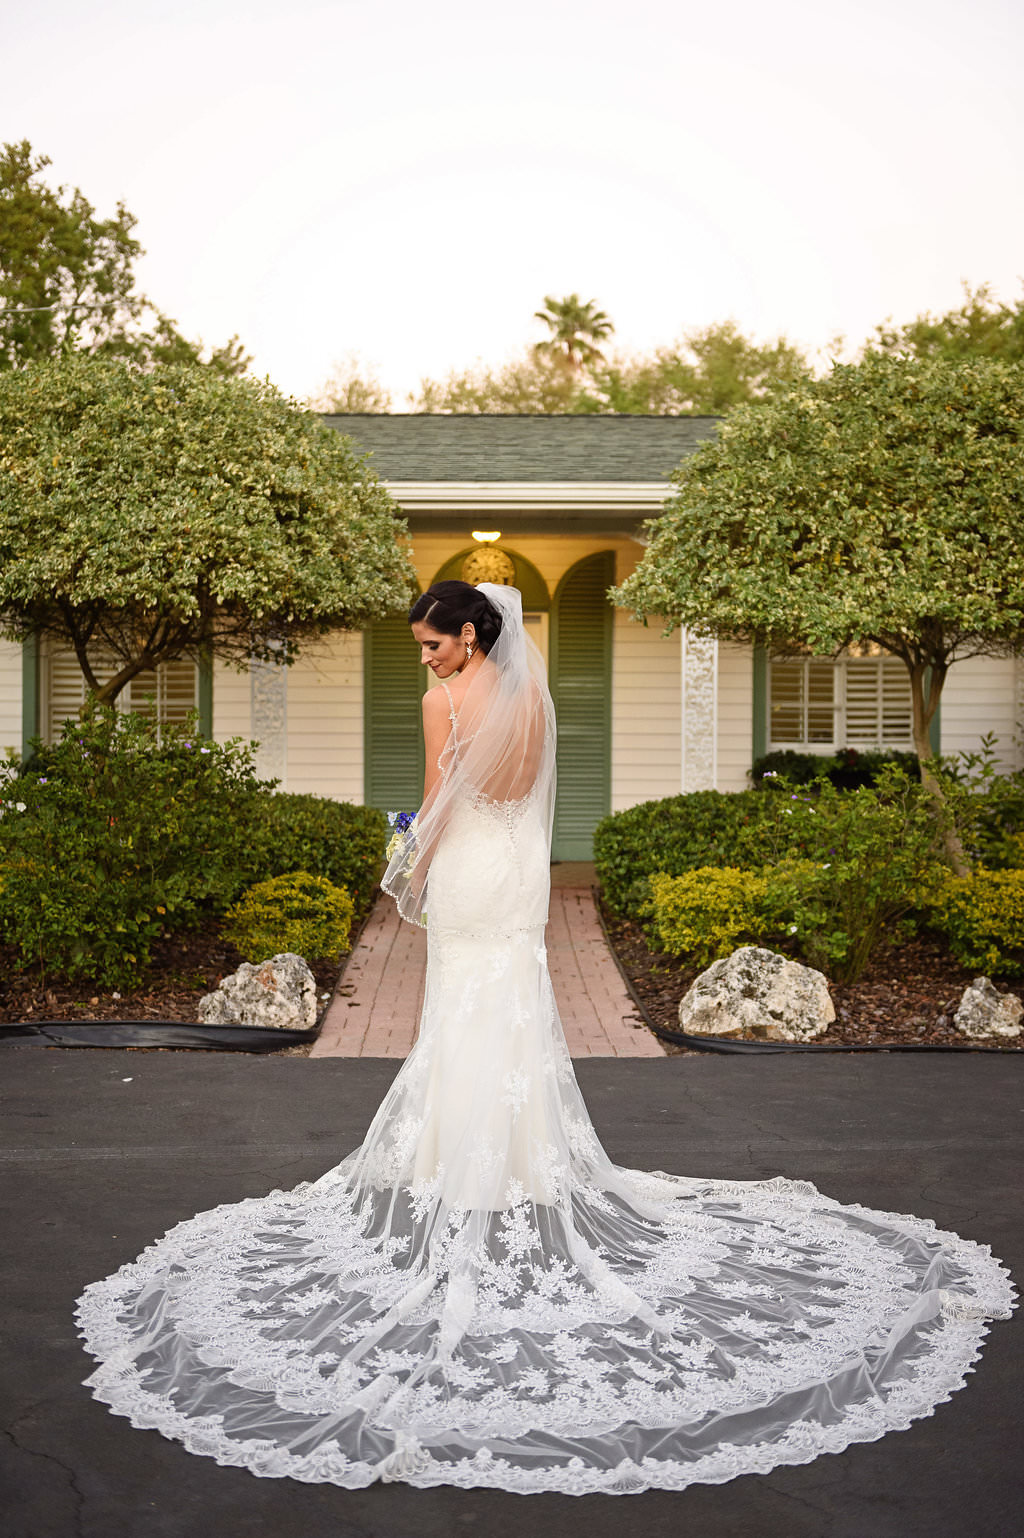 Outdoor Bridal Portrait in Low Back Lace Spaghetti Strap Kitty Chen Couture Wedding Dress and Veil | Tampa Bay Wedding Photographer Marc Edwards Photographs